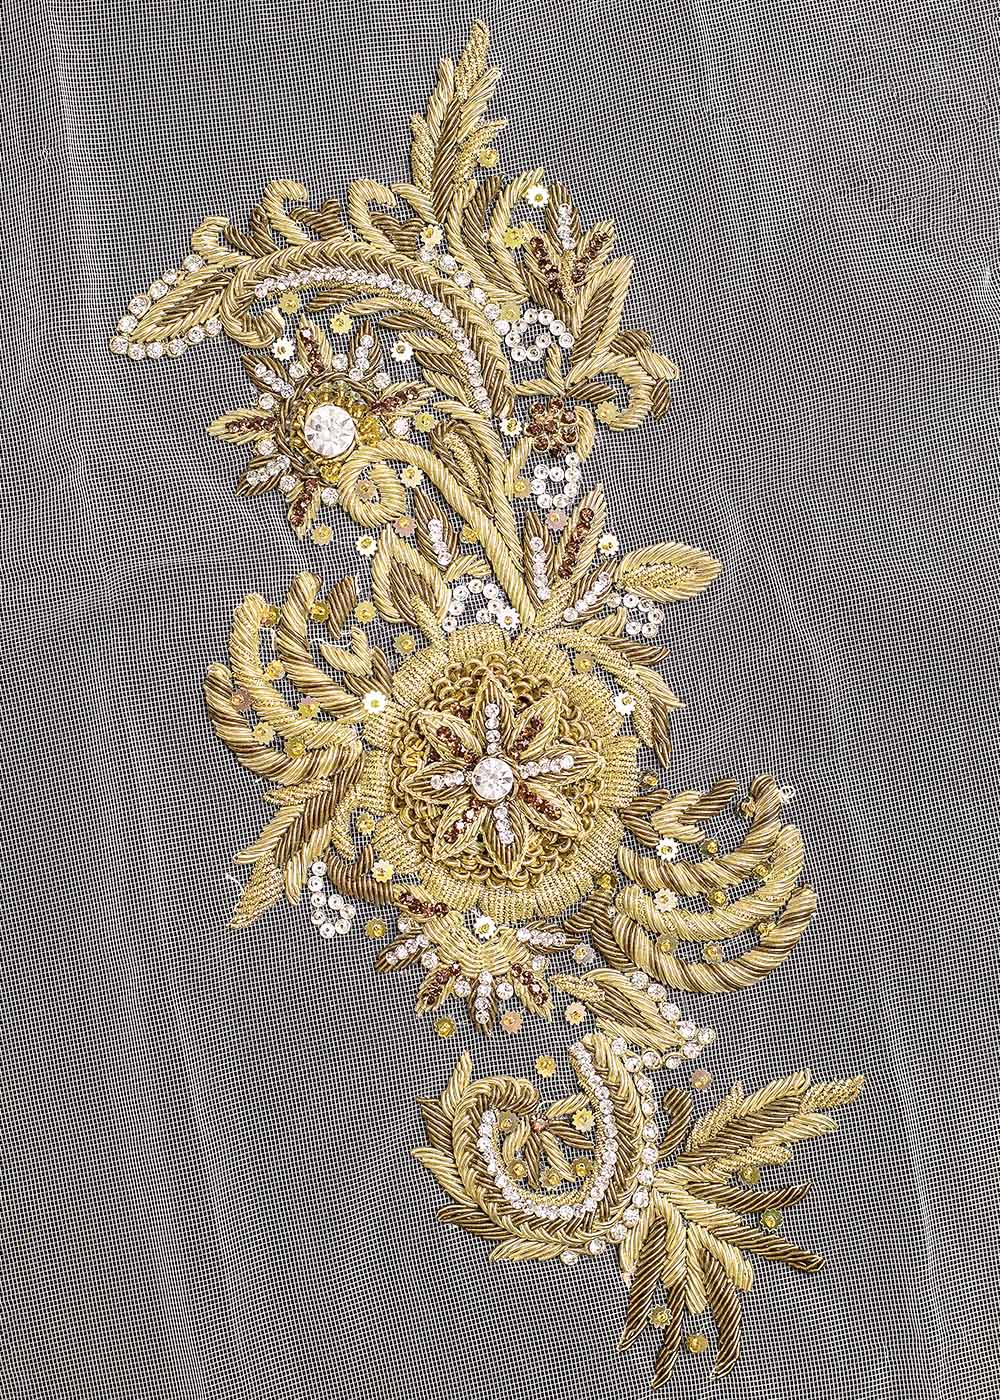 Fragment with embroidery and rhinestones